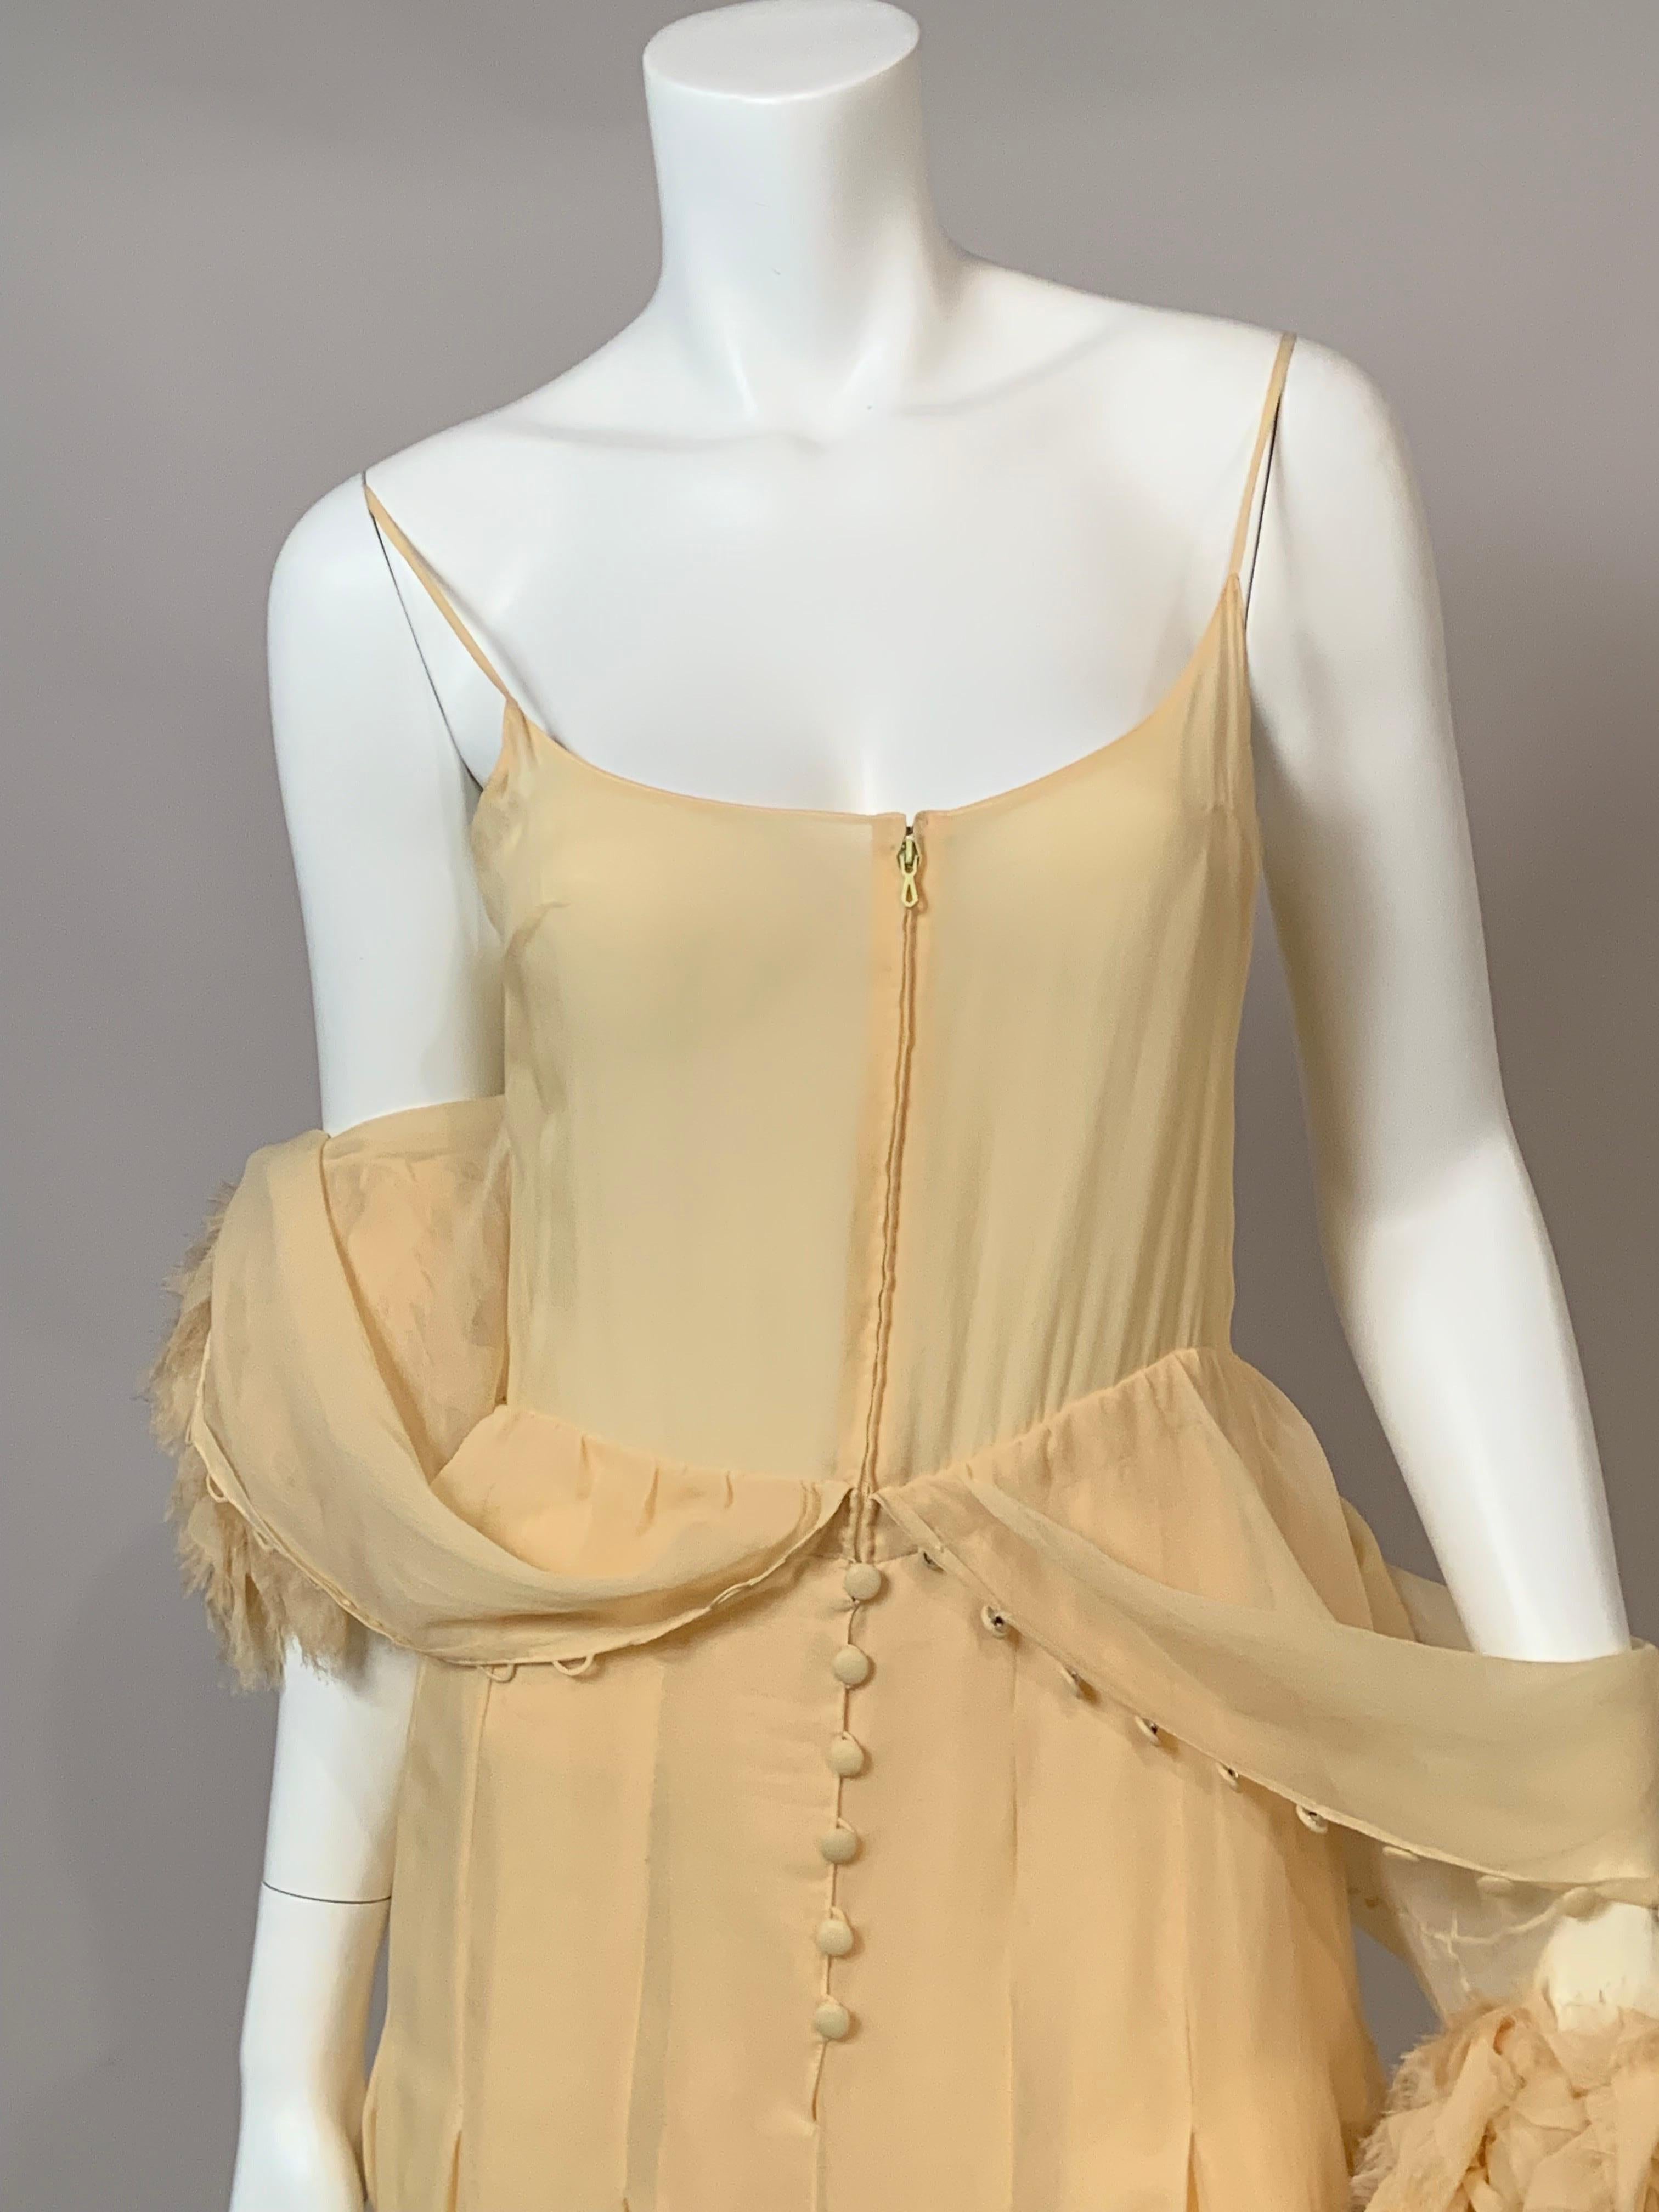 1984 Chanel by Karl Lagerfeld Butter Yellow Silk Chiffon Evening Gown Never Worn 11